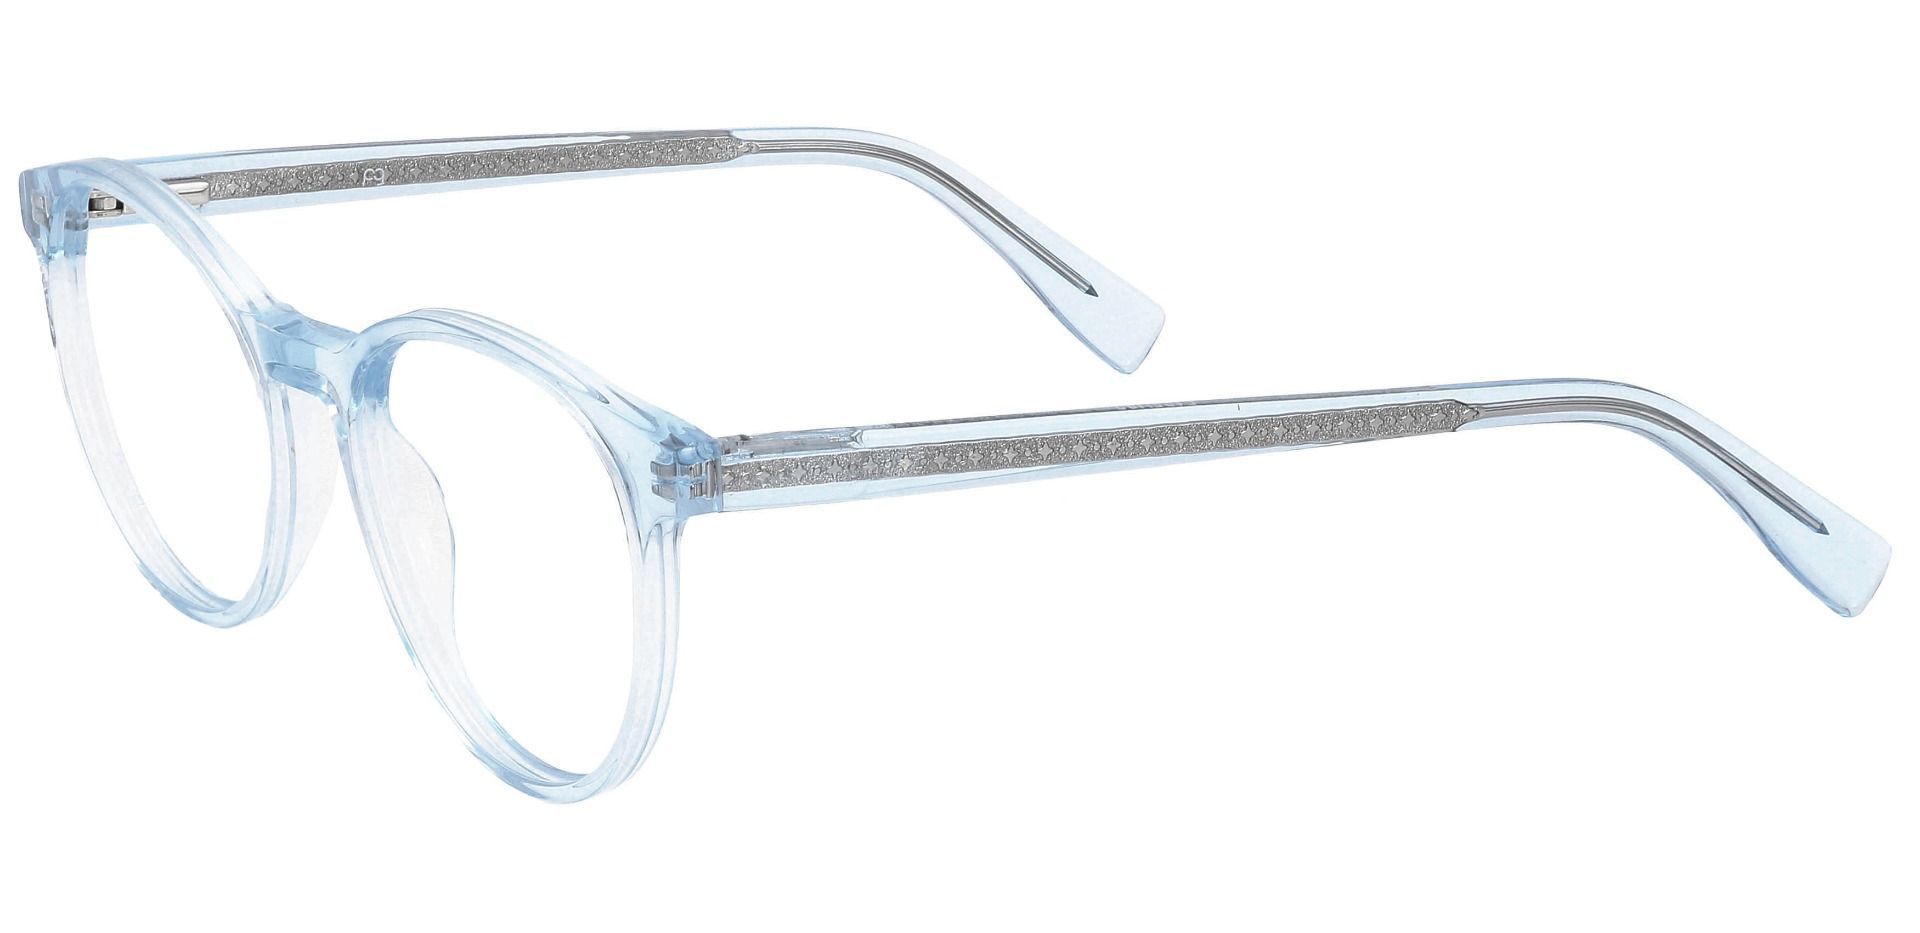 Stellar Oval Non-Rx Glasses - The Frame Is Clear With Light Blue